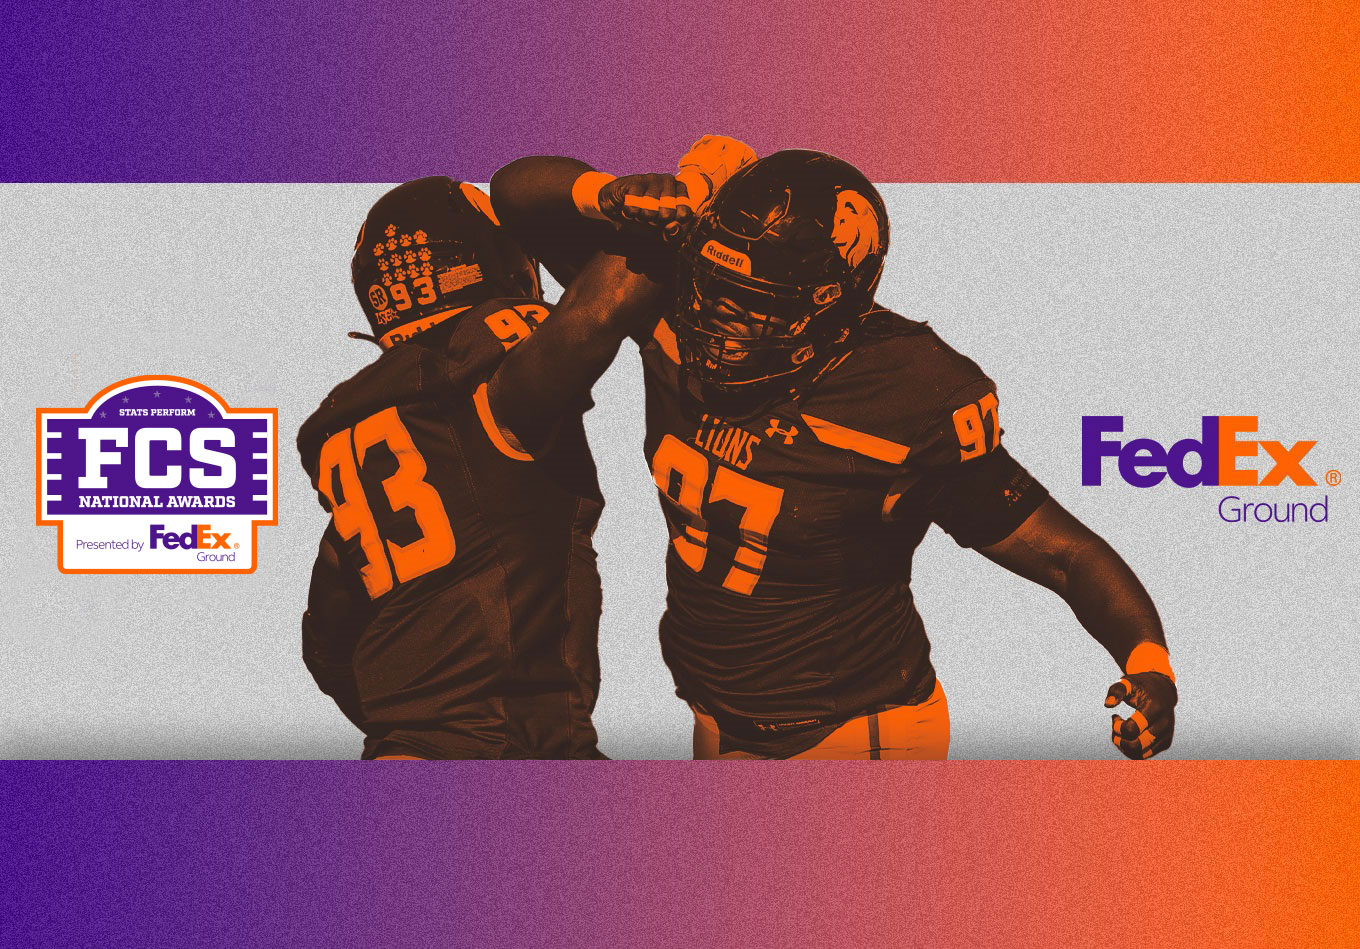 FedEx Ground’s Support of FCS Expands Through National Awards Banquet, Top 25 Poll, Weekly Podcast